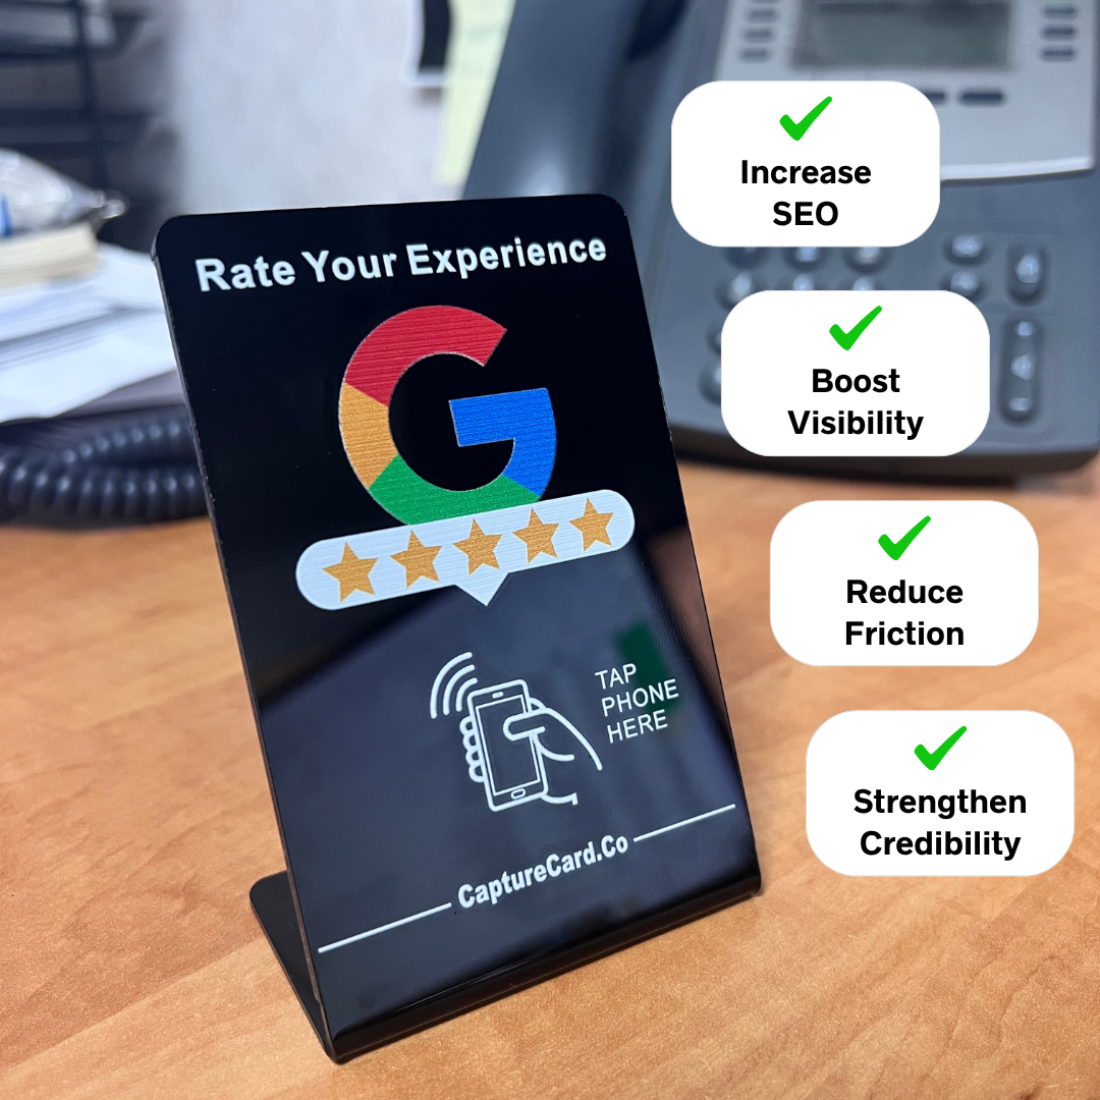 Capture Card - Google Review Stand